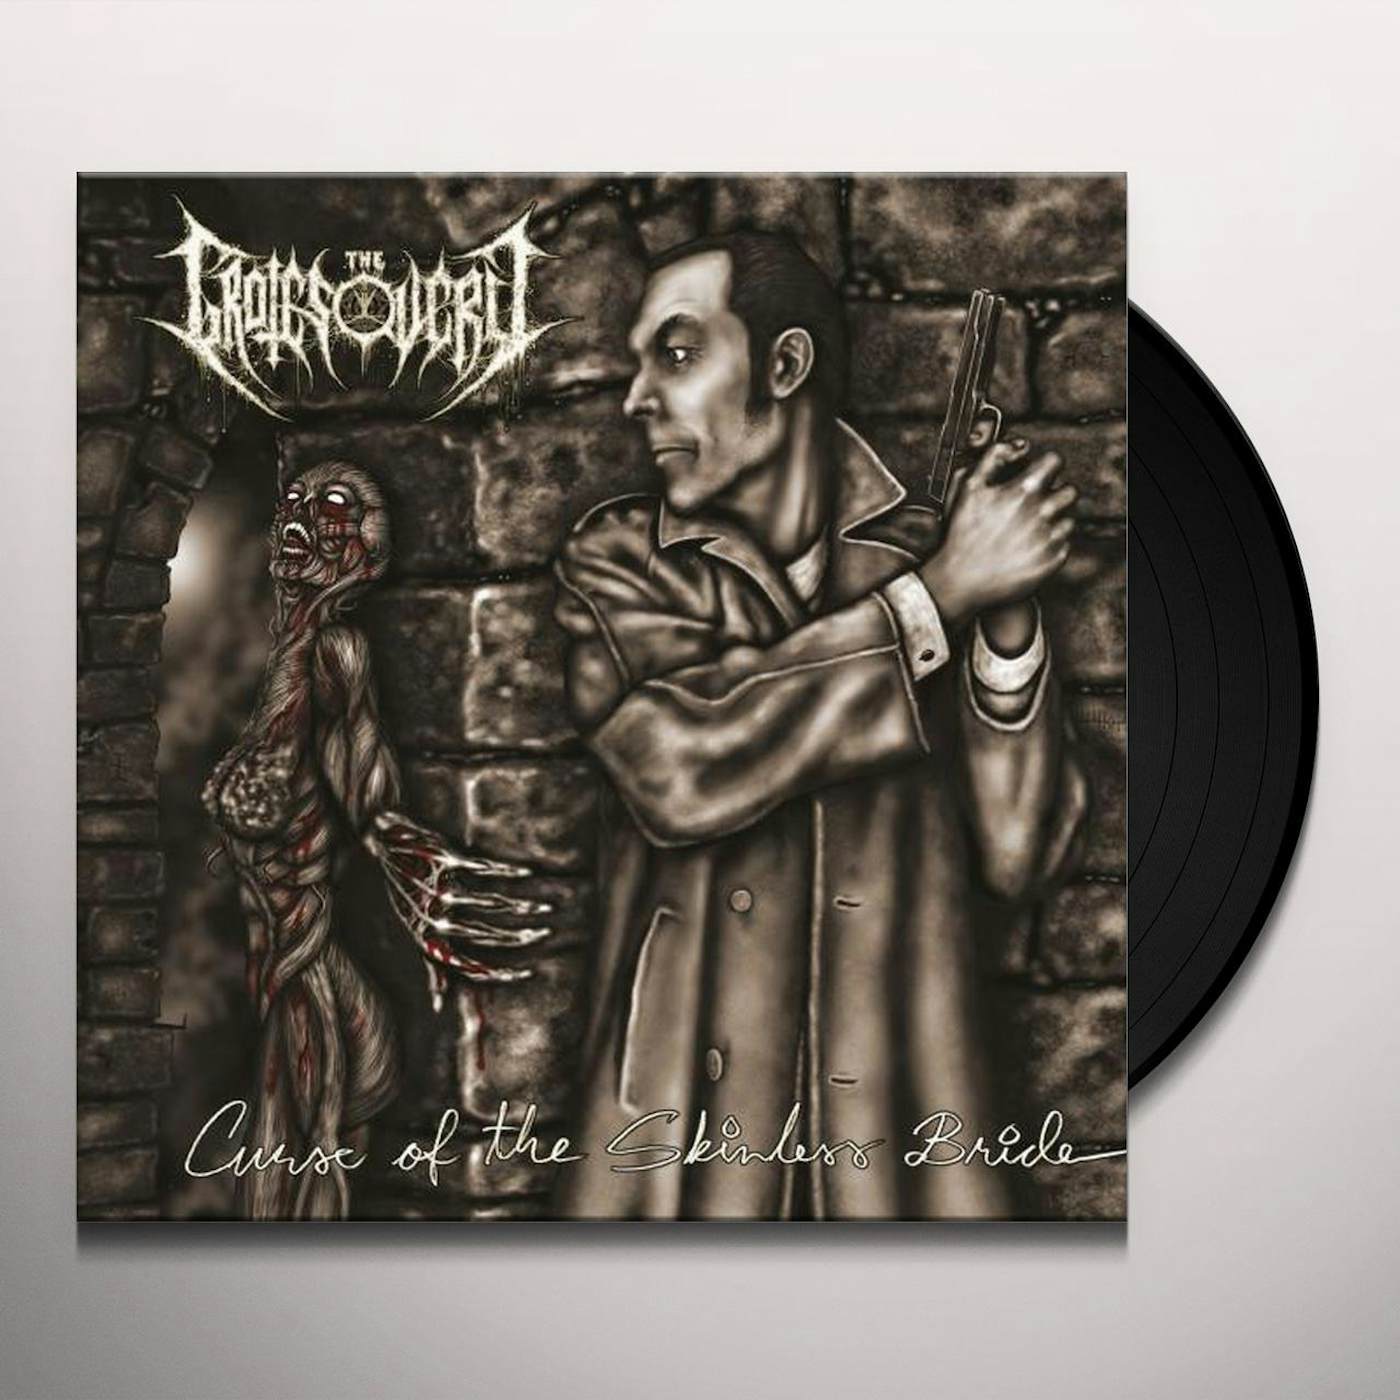 The Grotesquery Curse of the Skinless Bride Vinyl Record